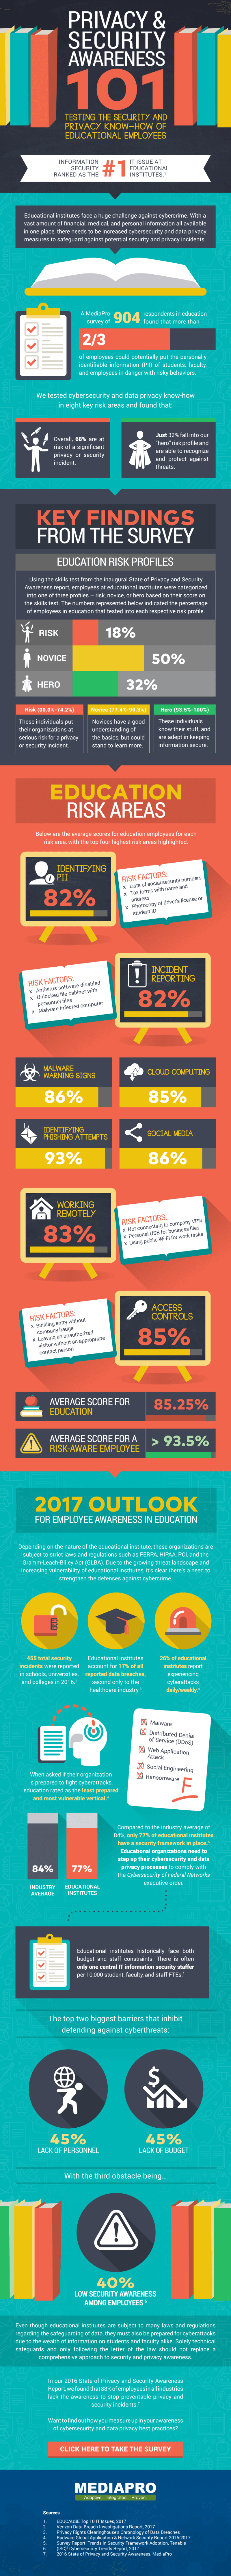 State of Privacy and Security Awareness in Education Infographic